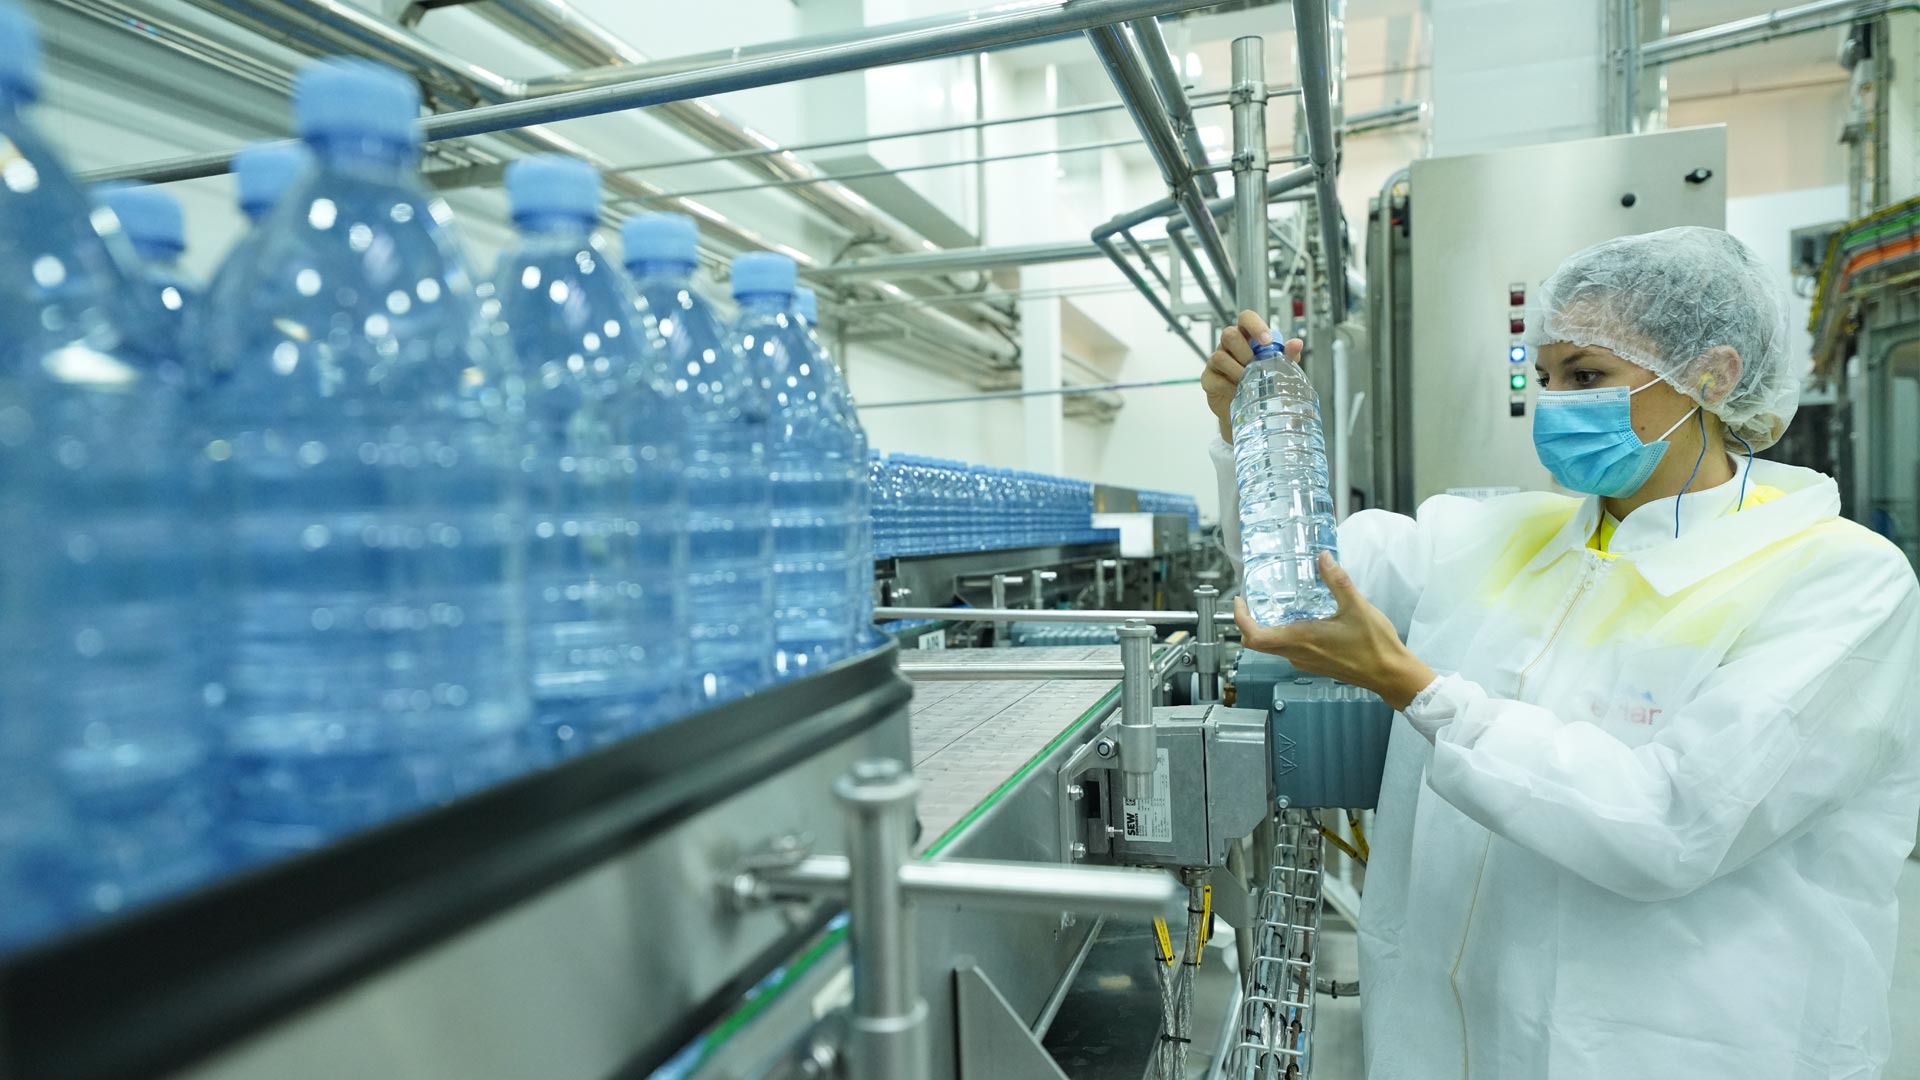 Bottled Water in a Pandemic? Evian Owner Danone Needs a New